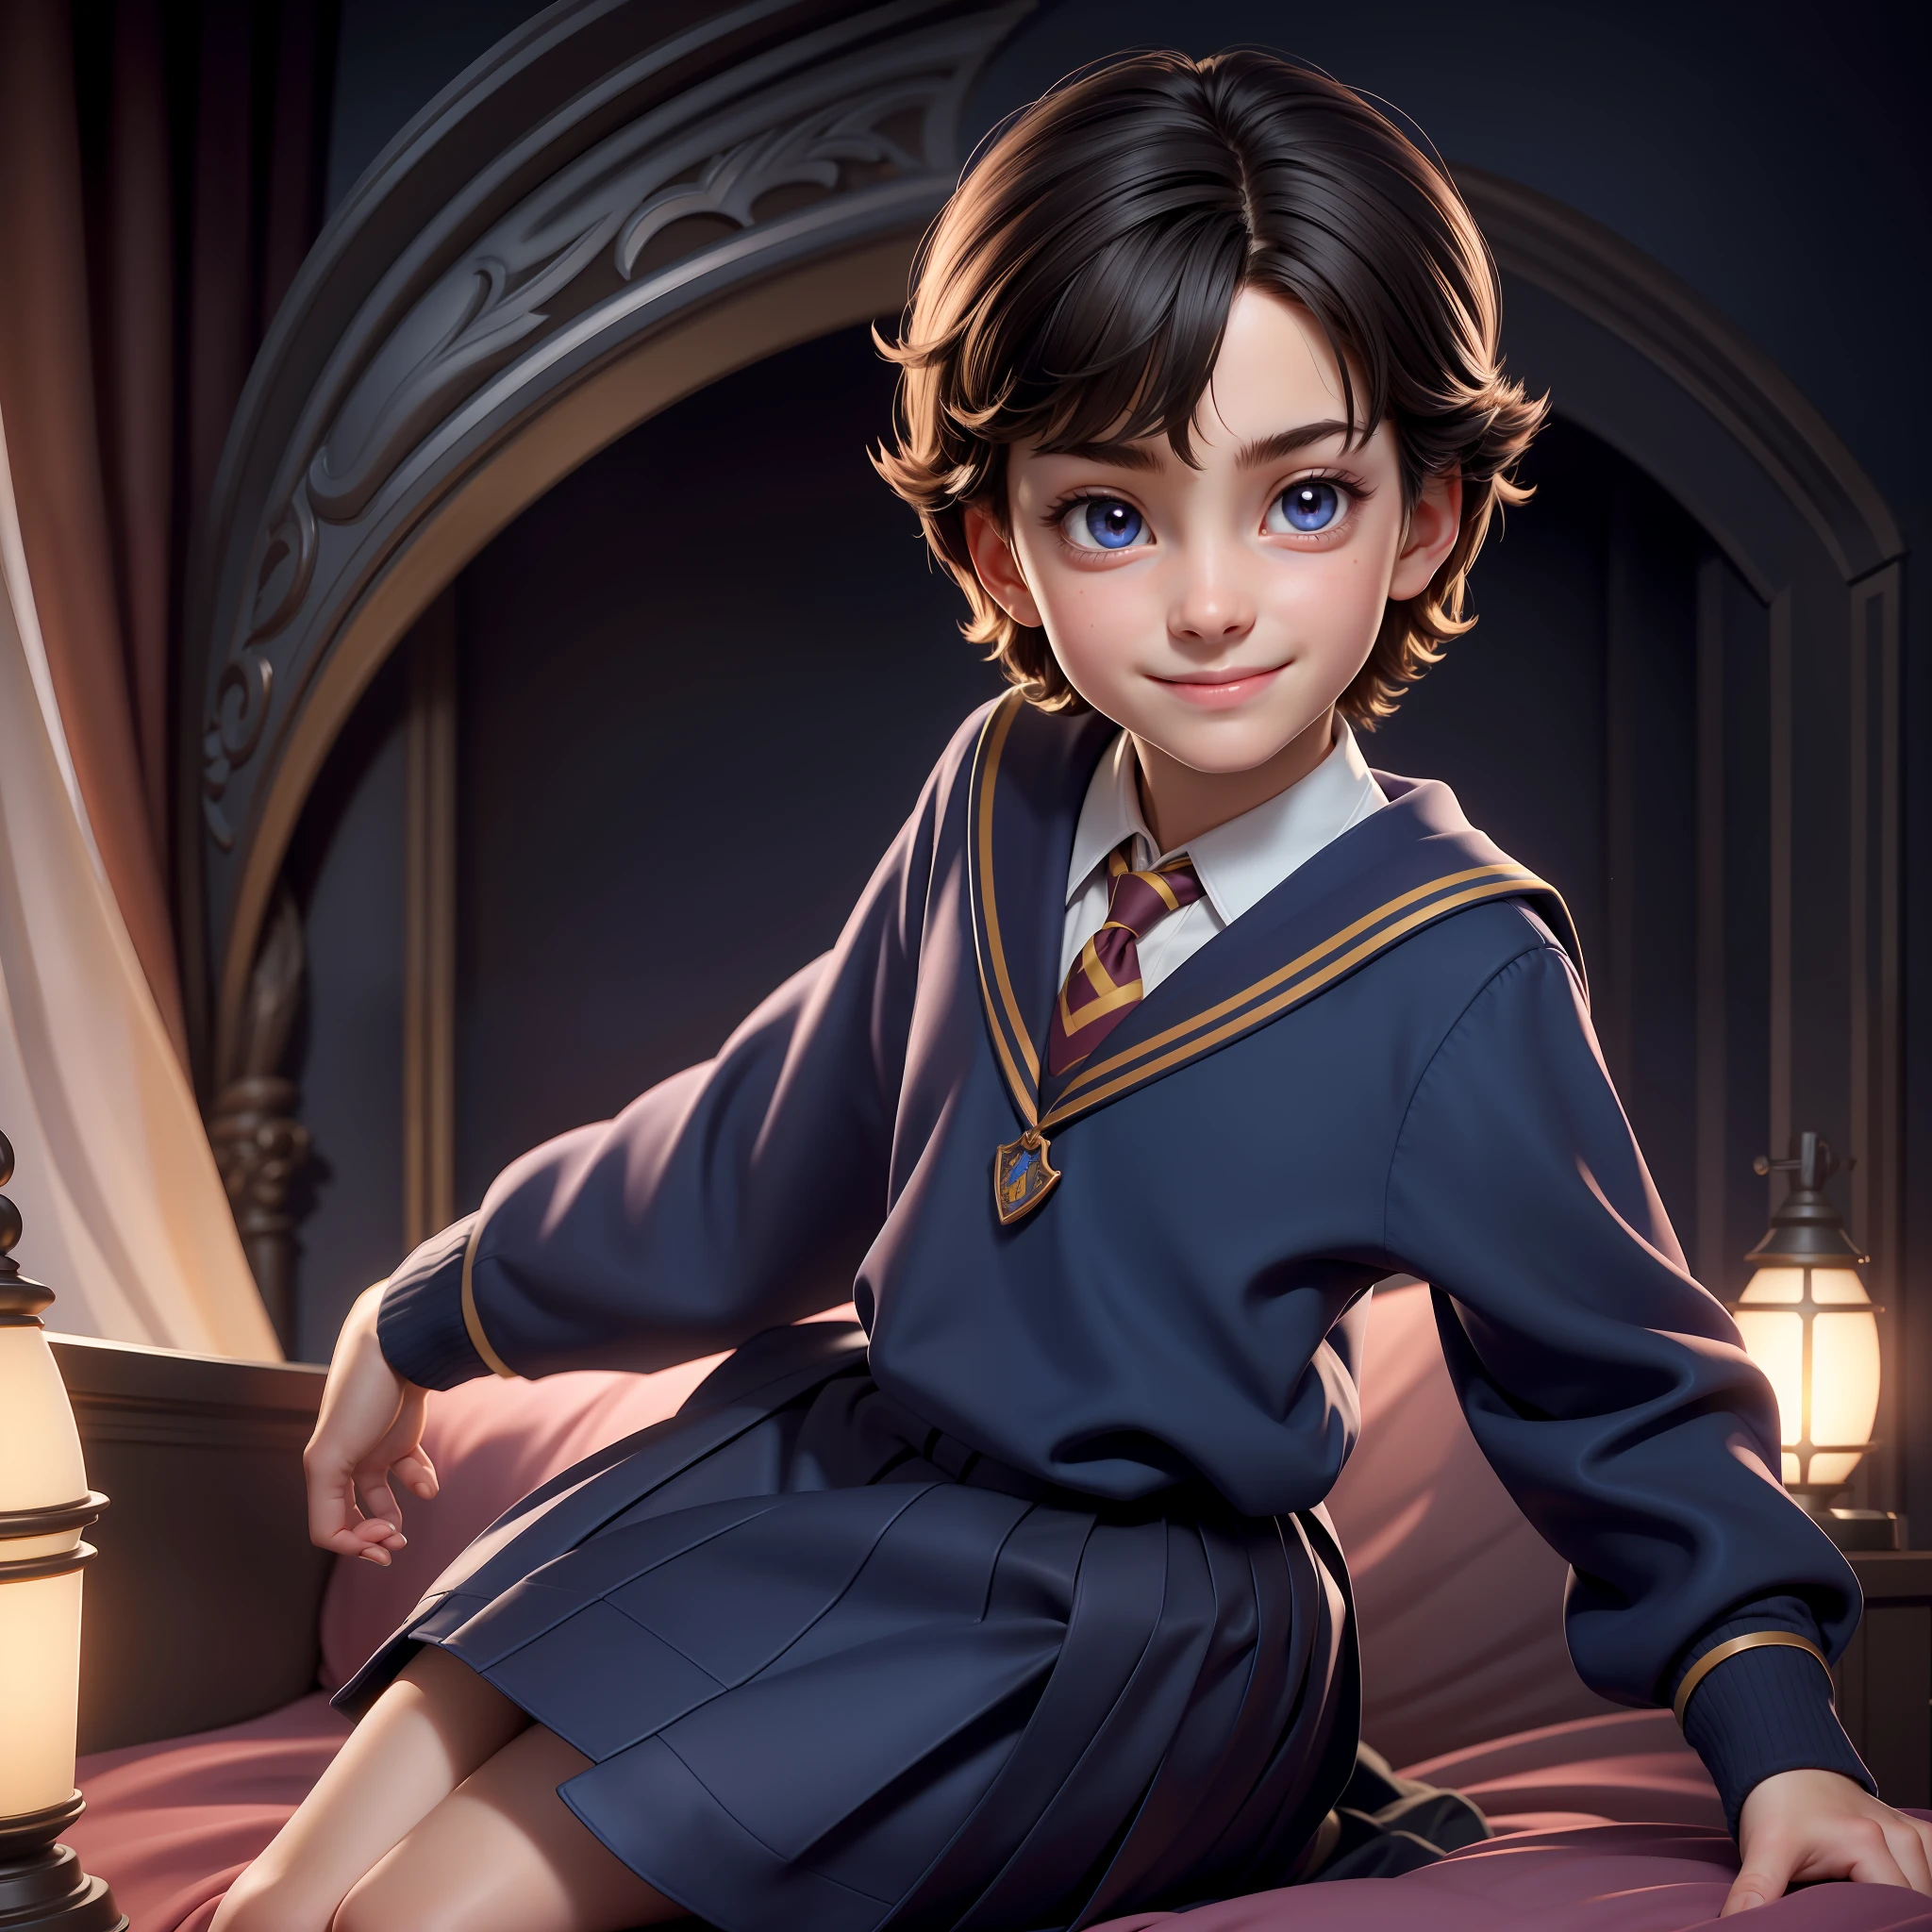 9yo, 1boy, child, solo, Harry Potter, full body, solo, school uniform, beautiful face highly detailed and eyes, beautiful skin, bed room, shiney solar lighting, 9yo, 1girl, , solo, Harry Potter, , beautiful skin, smile perfect anatomy, shiney solar lighting